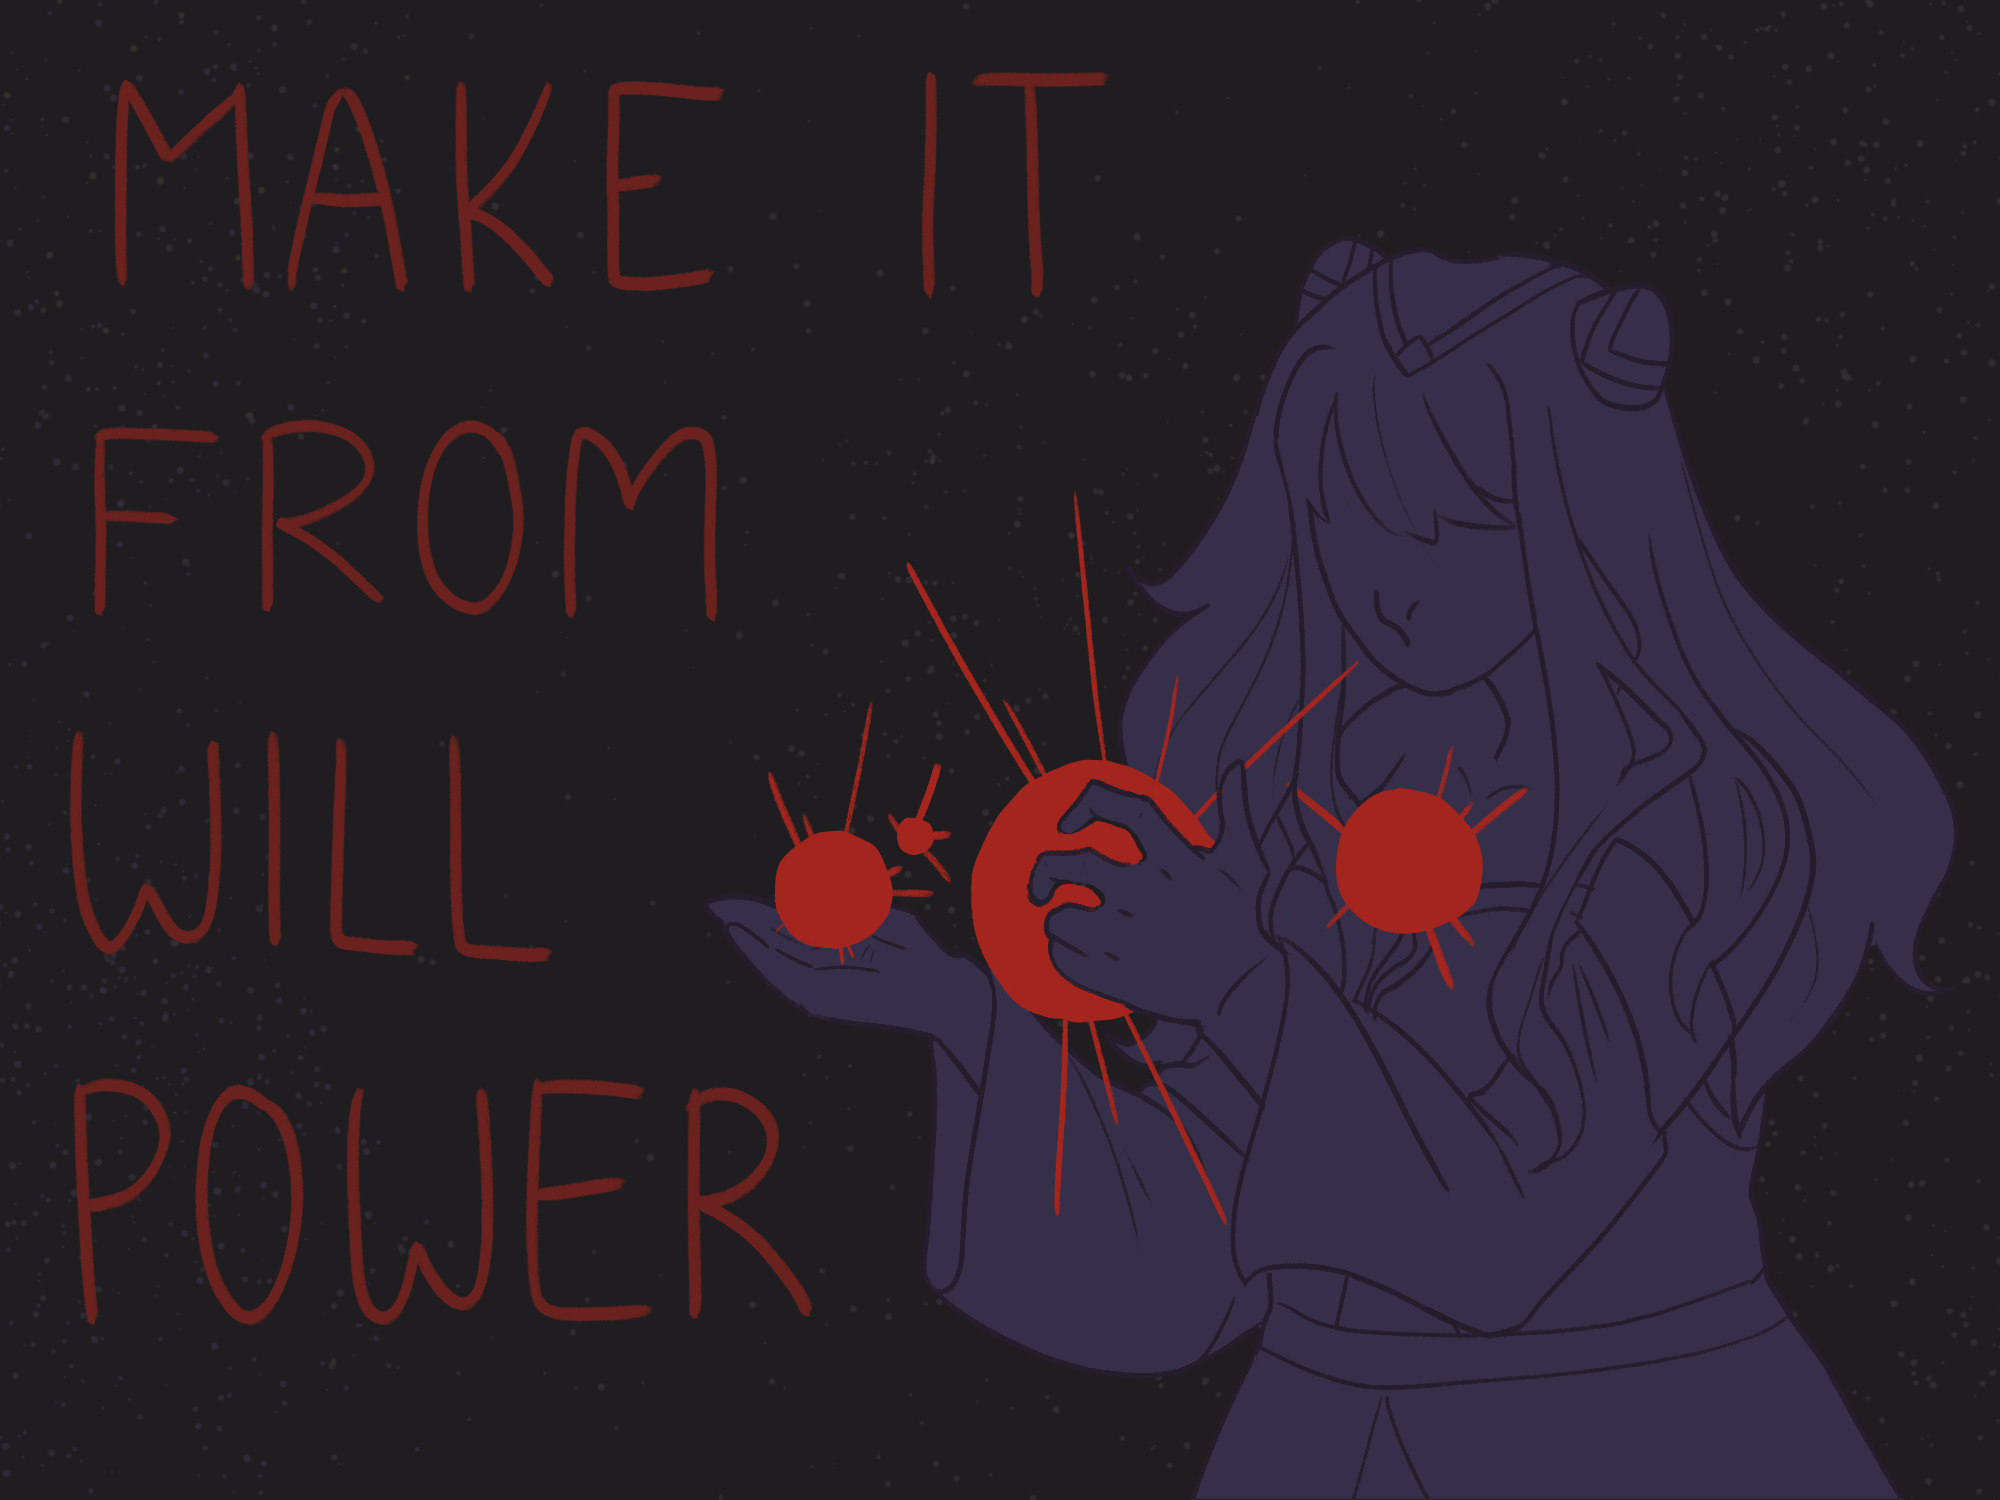 ID: A panel from a poem comic featuring the character Basilisk Id from Reflection. She is represented as a monochrome faceless figure with her Act 1 design. She has her hands in a holding position in front of her chest, floating over which are variously sized red circles with sunburst lines coming out of them. Large handwritten text to the left of Basilisk reads 'Make it (hope) from willpower.' End ID.